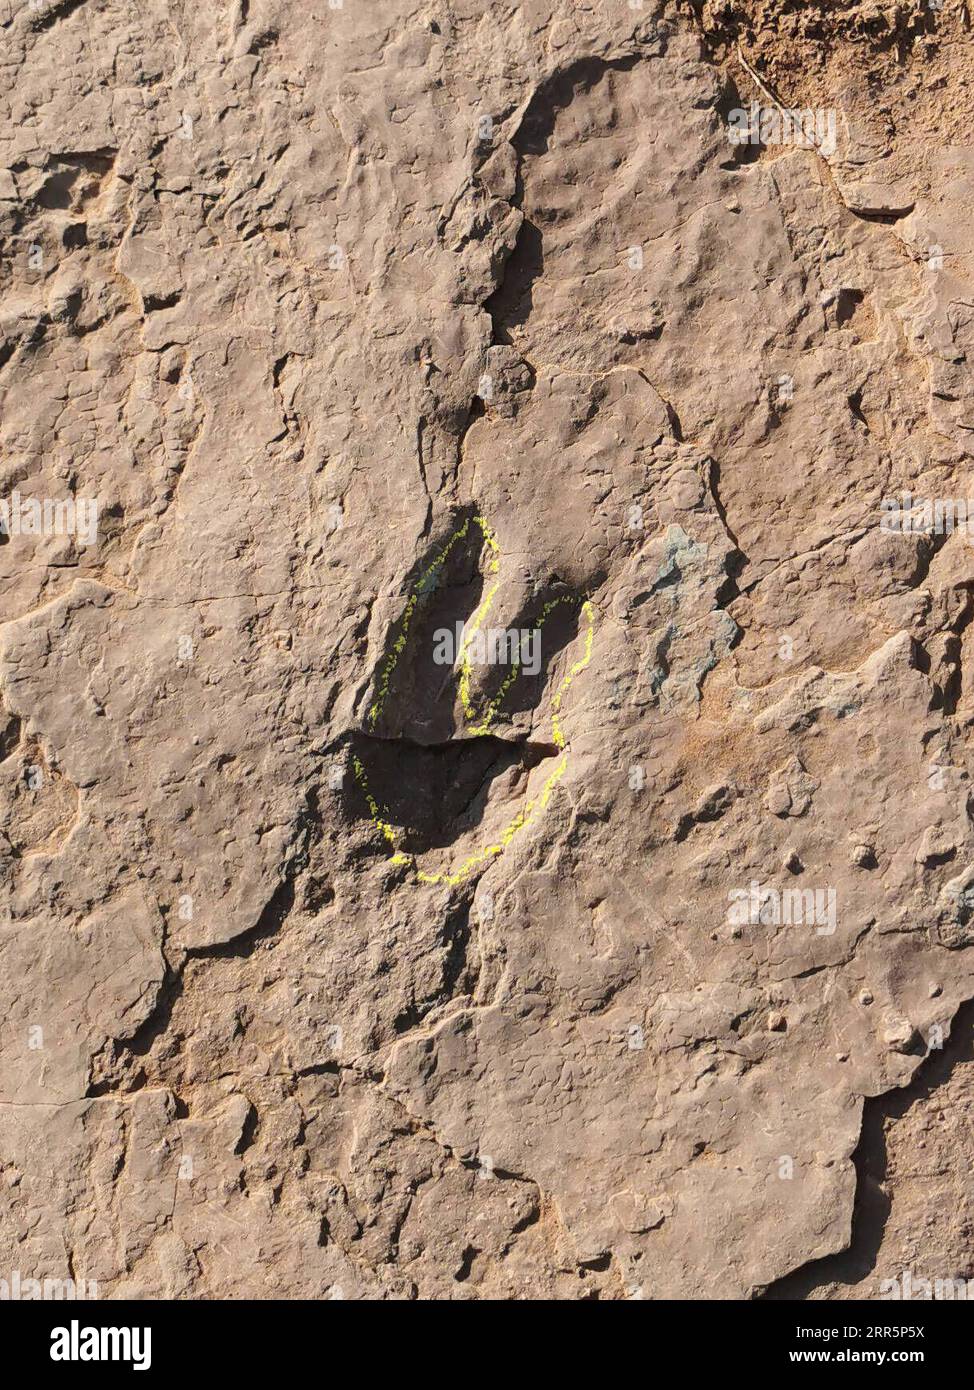 210112 -- FUZHOU, Jan. 12, 2021  -- A dinosaur footprint is seen at Longxiang Village, Lincheng Township, Shanghang County, southeast China s Fujian Province, Nov. 9, 2020. A team of Chinese paleontologists has identified more than 240 fossilized dinosaur footprints in east China s Fujian, the first traces of dinosaur activity found in the province. The dinosaur track site in Shanghang County, covering an area of about 1,600 square meters, is the largest and the most diverse such site discovered in China dating back to the Upper Cretaceous period, according to scientists. The 80-million-year-o Stock Photo